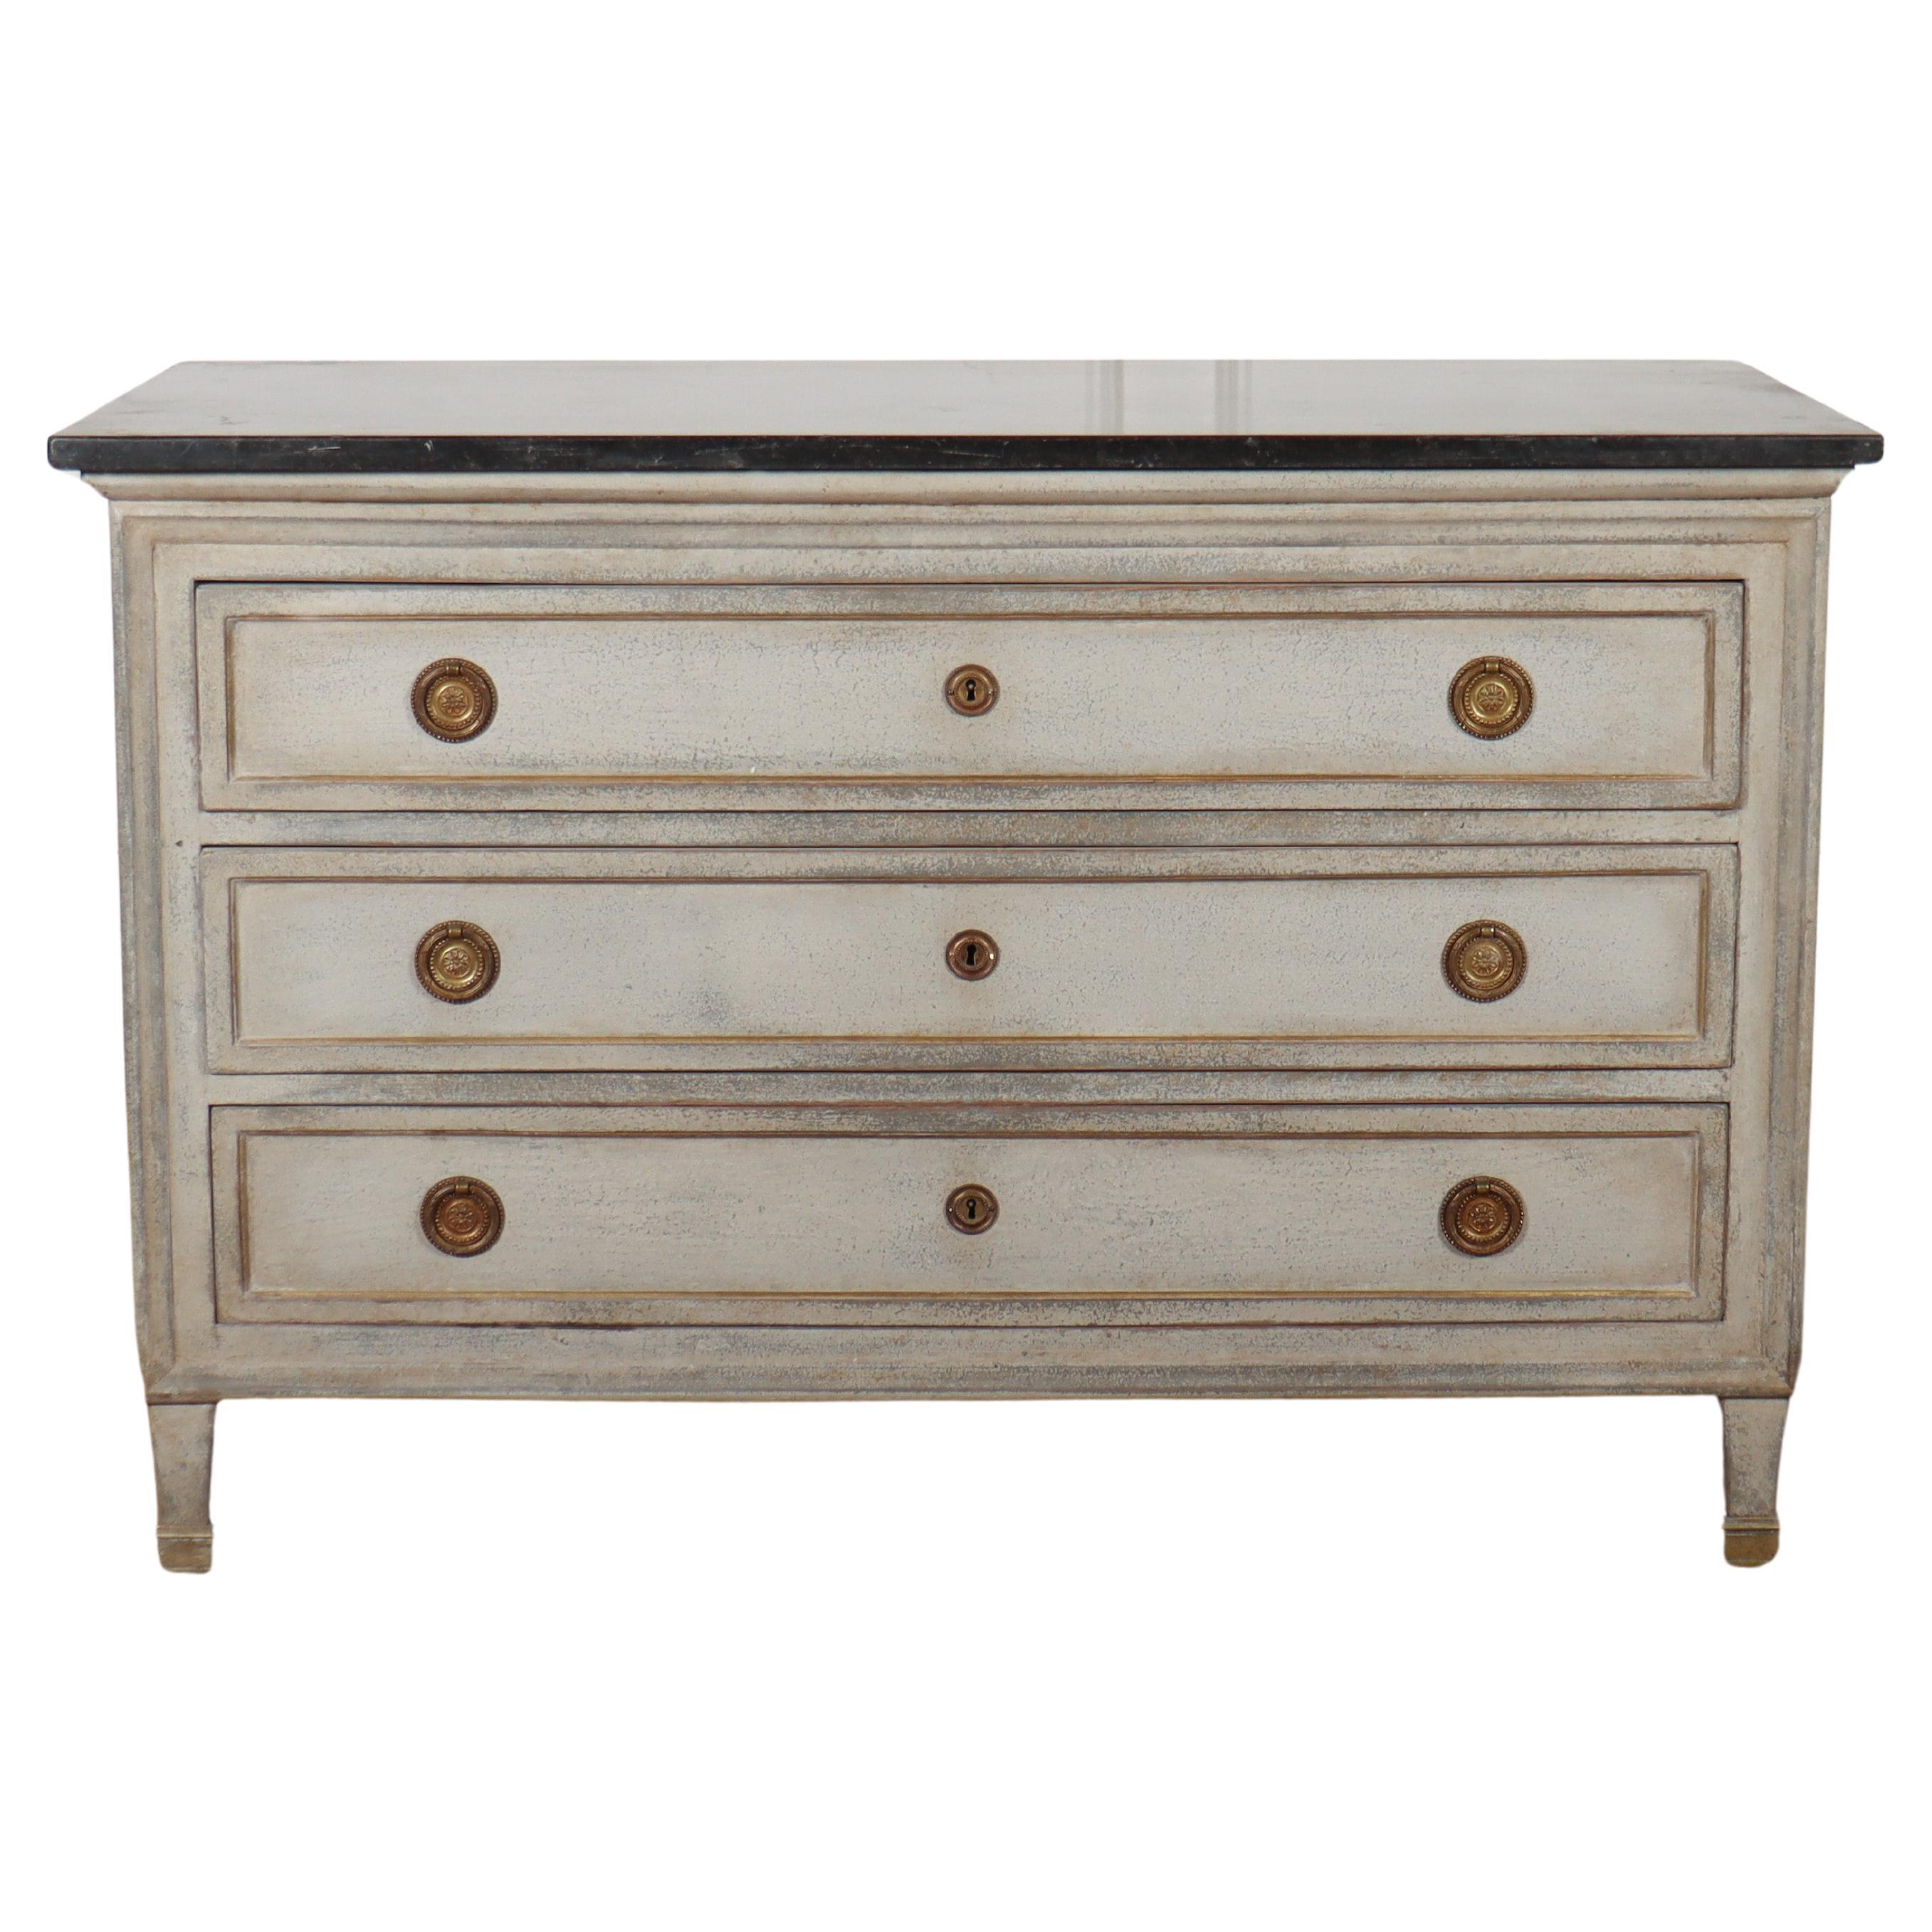 French Painted Marble Top Commode